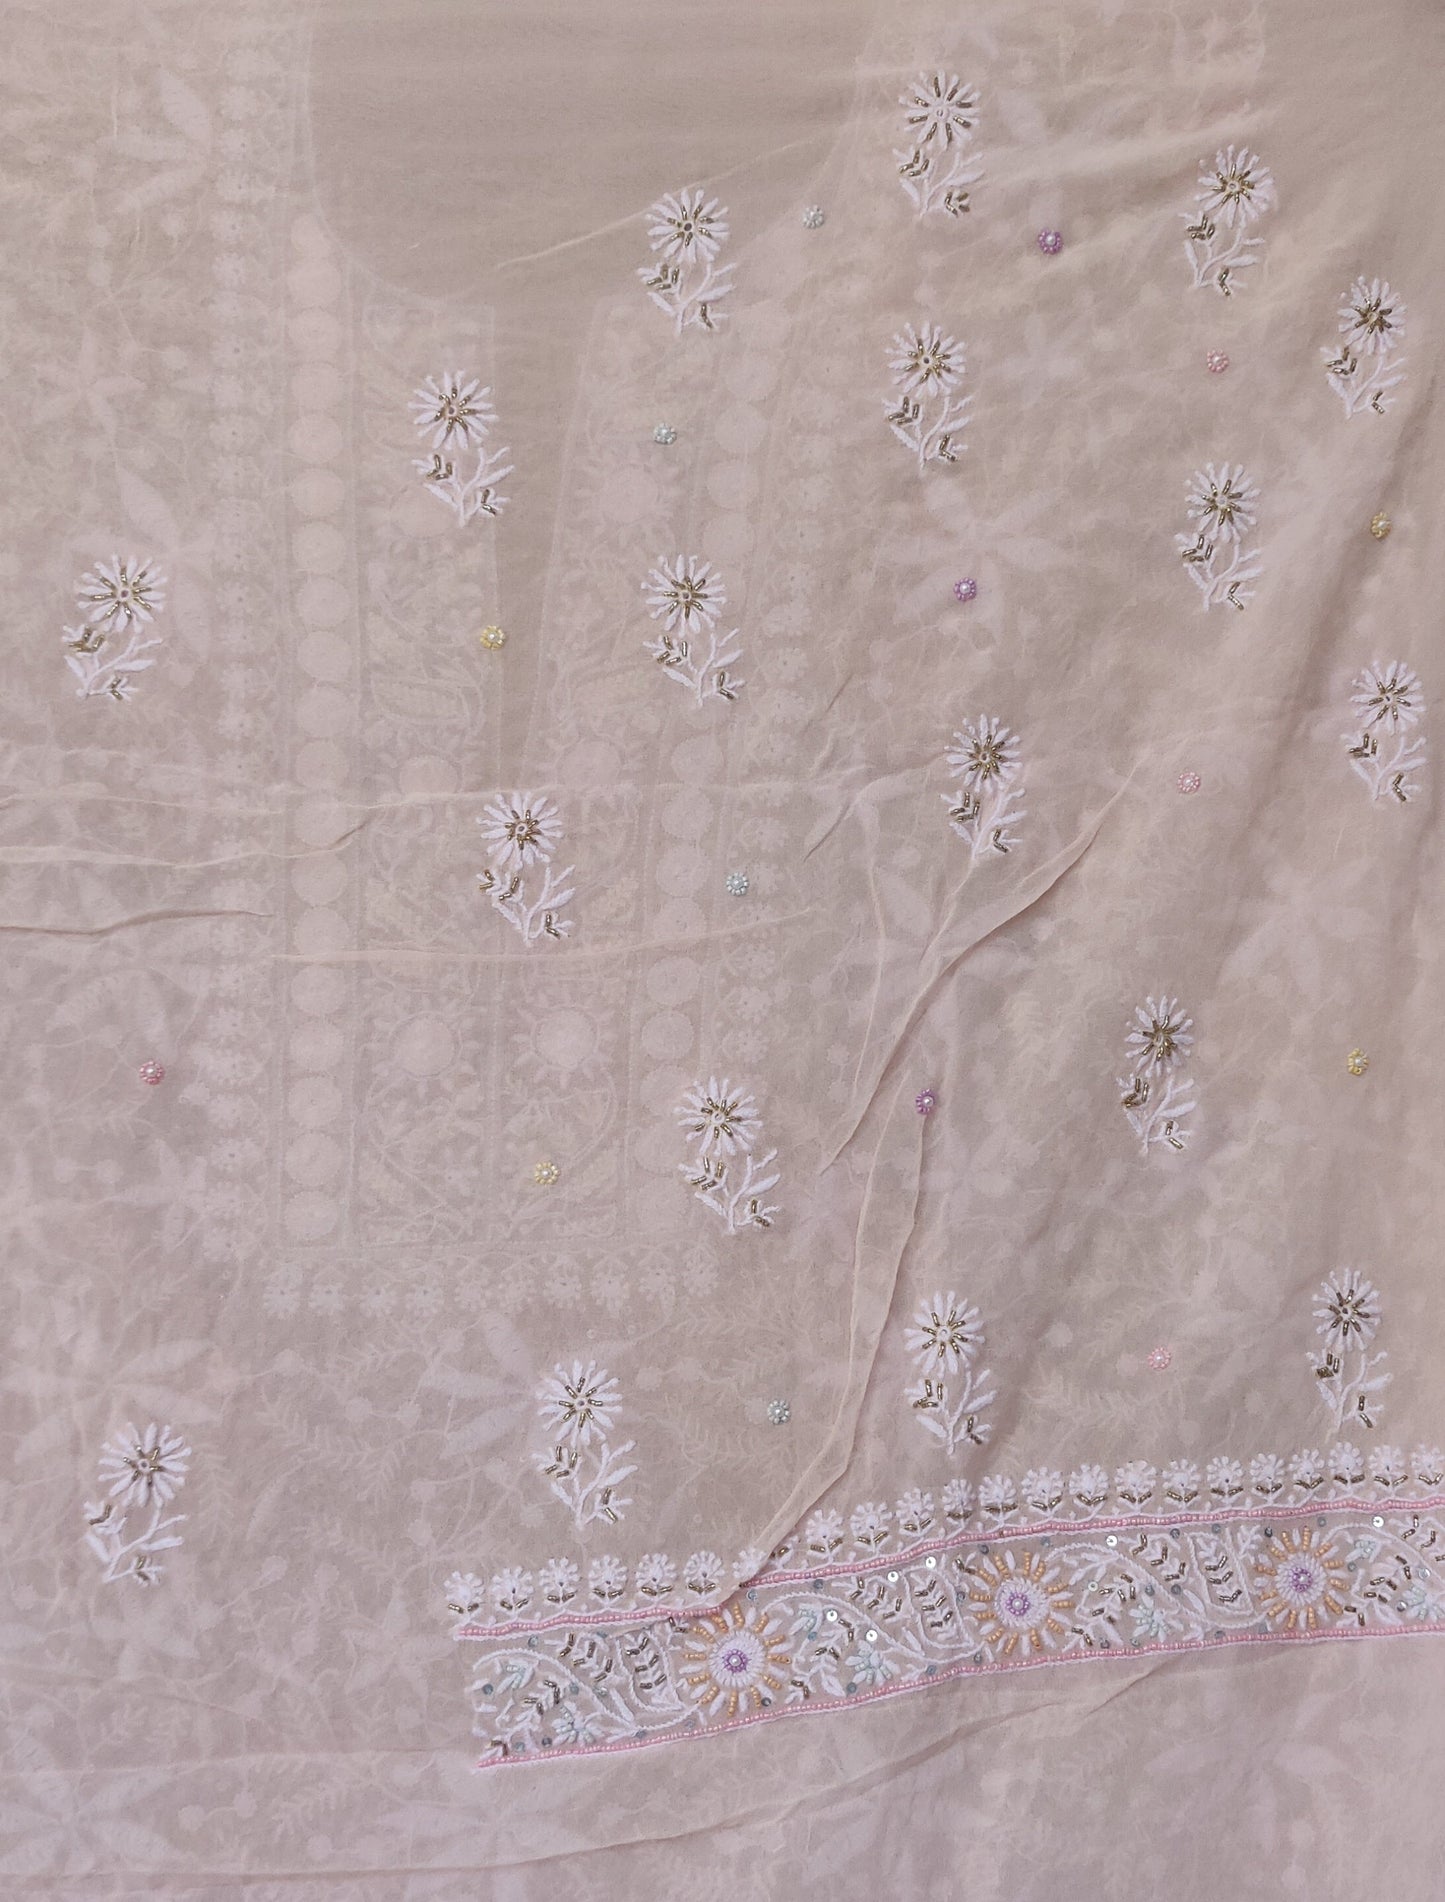 Ruhani Dusty Pink Chikankari with Multicolored Sequins Pearl and Cut Dana Suit